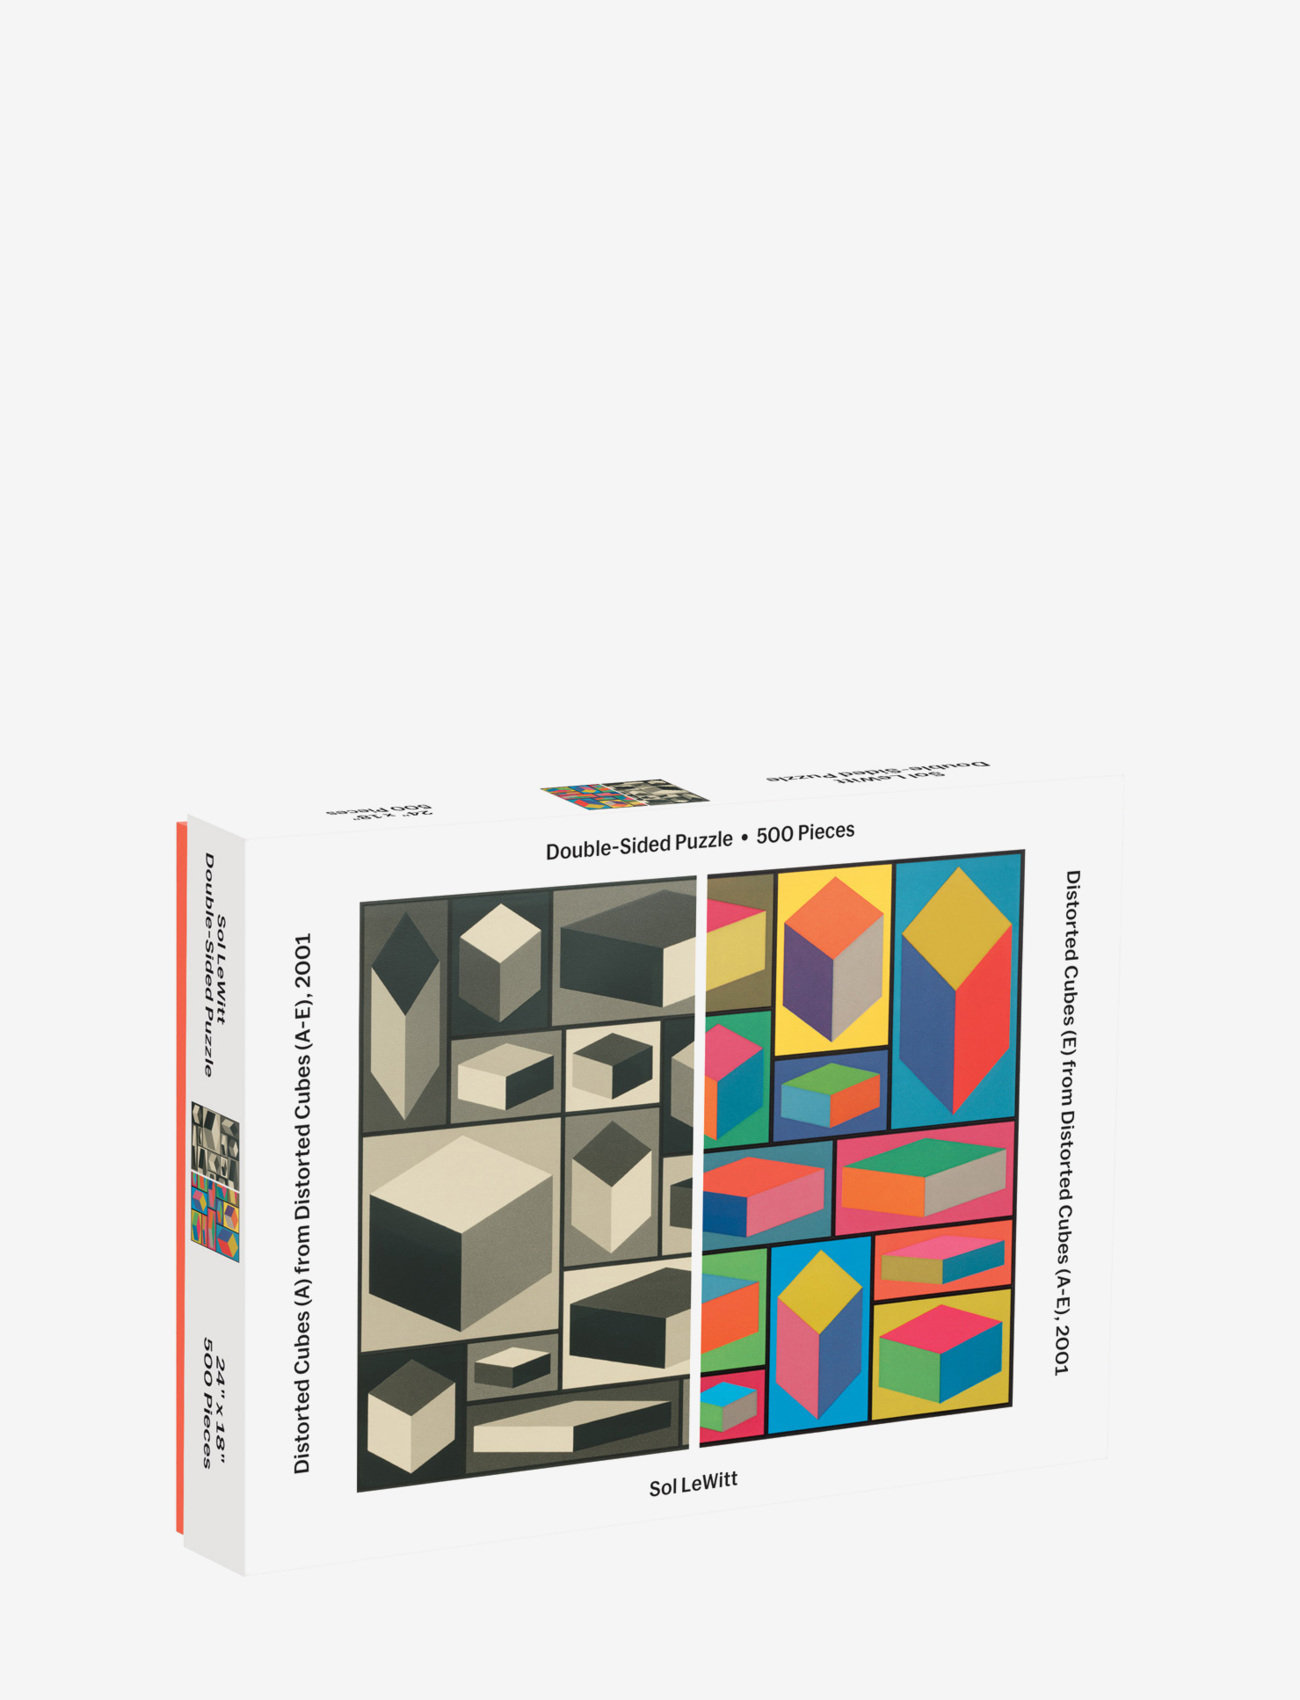 New Mags - Moma Sol Lewitt 2 Sided Puzzle - die niedrigsten preise - multicolor - 0